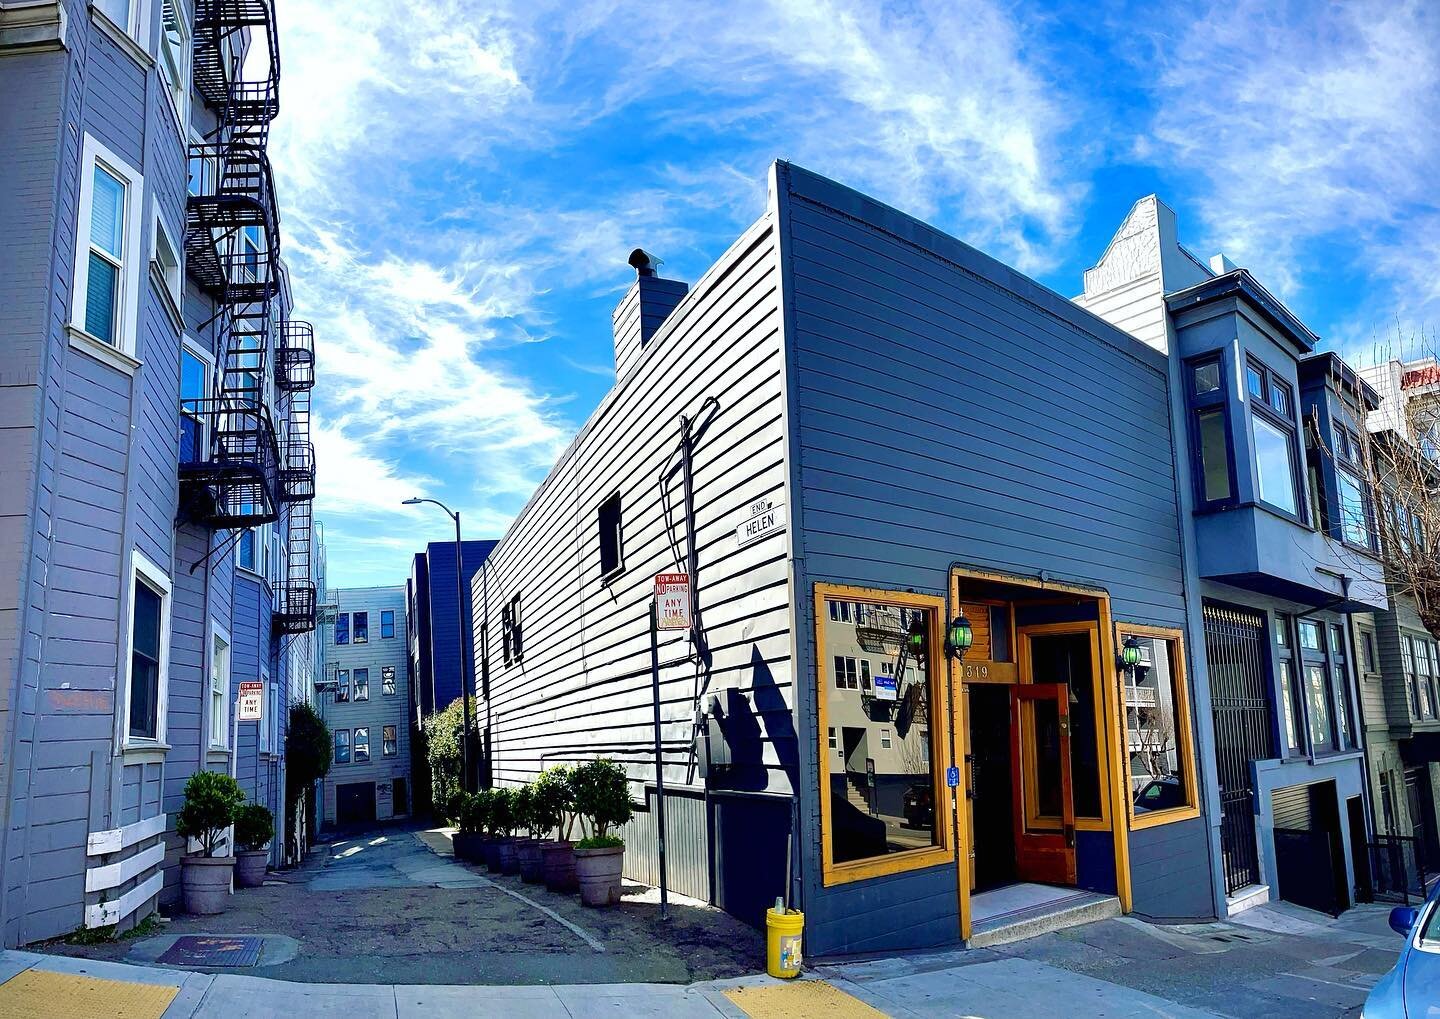 Nob Hill&rsquo;s coziest haven looking good under those blue skies&hellip; 

#nobhill #springforward #cocktails #sfhappyhour #sanfrancisco #sfbars #happyhour #cablecar #californiast